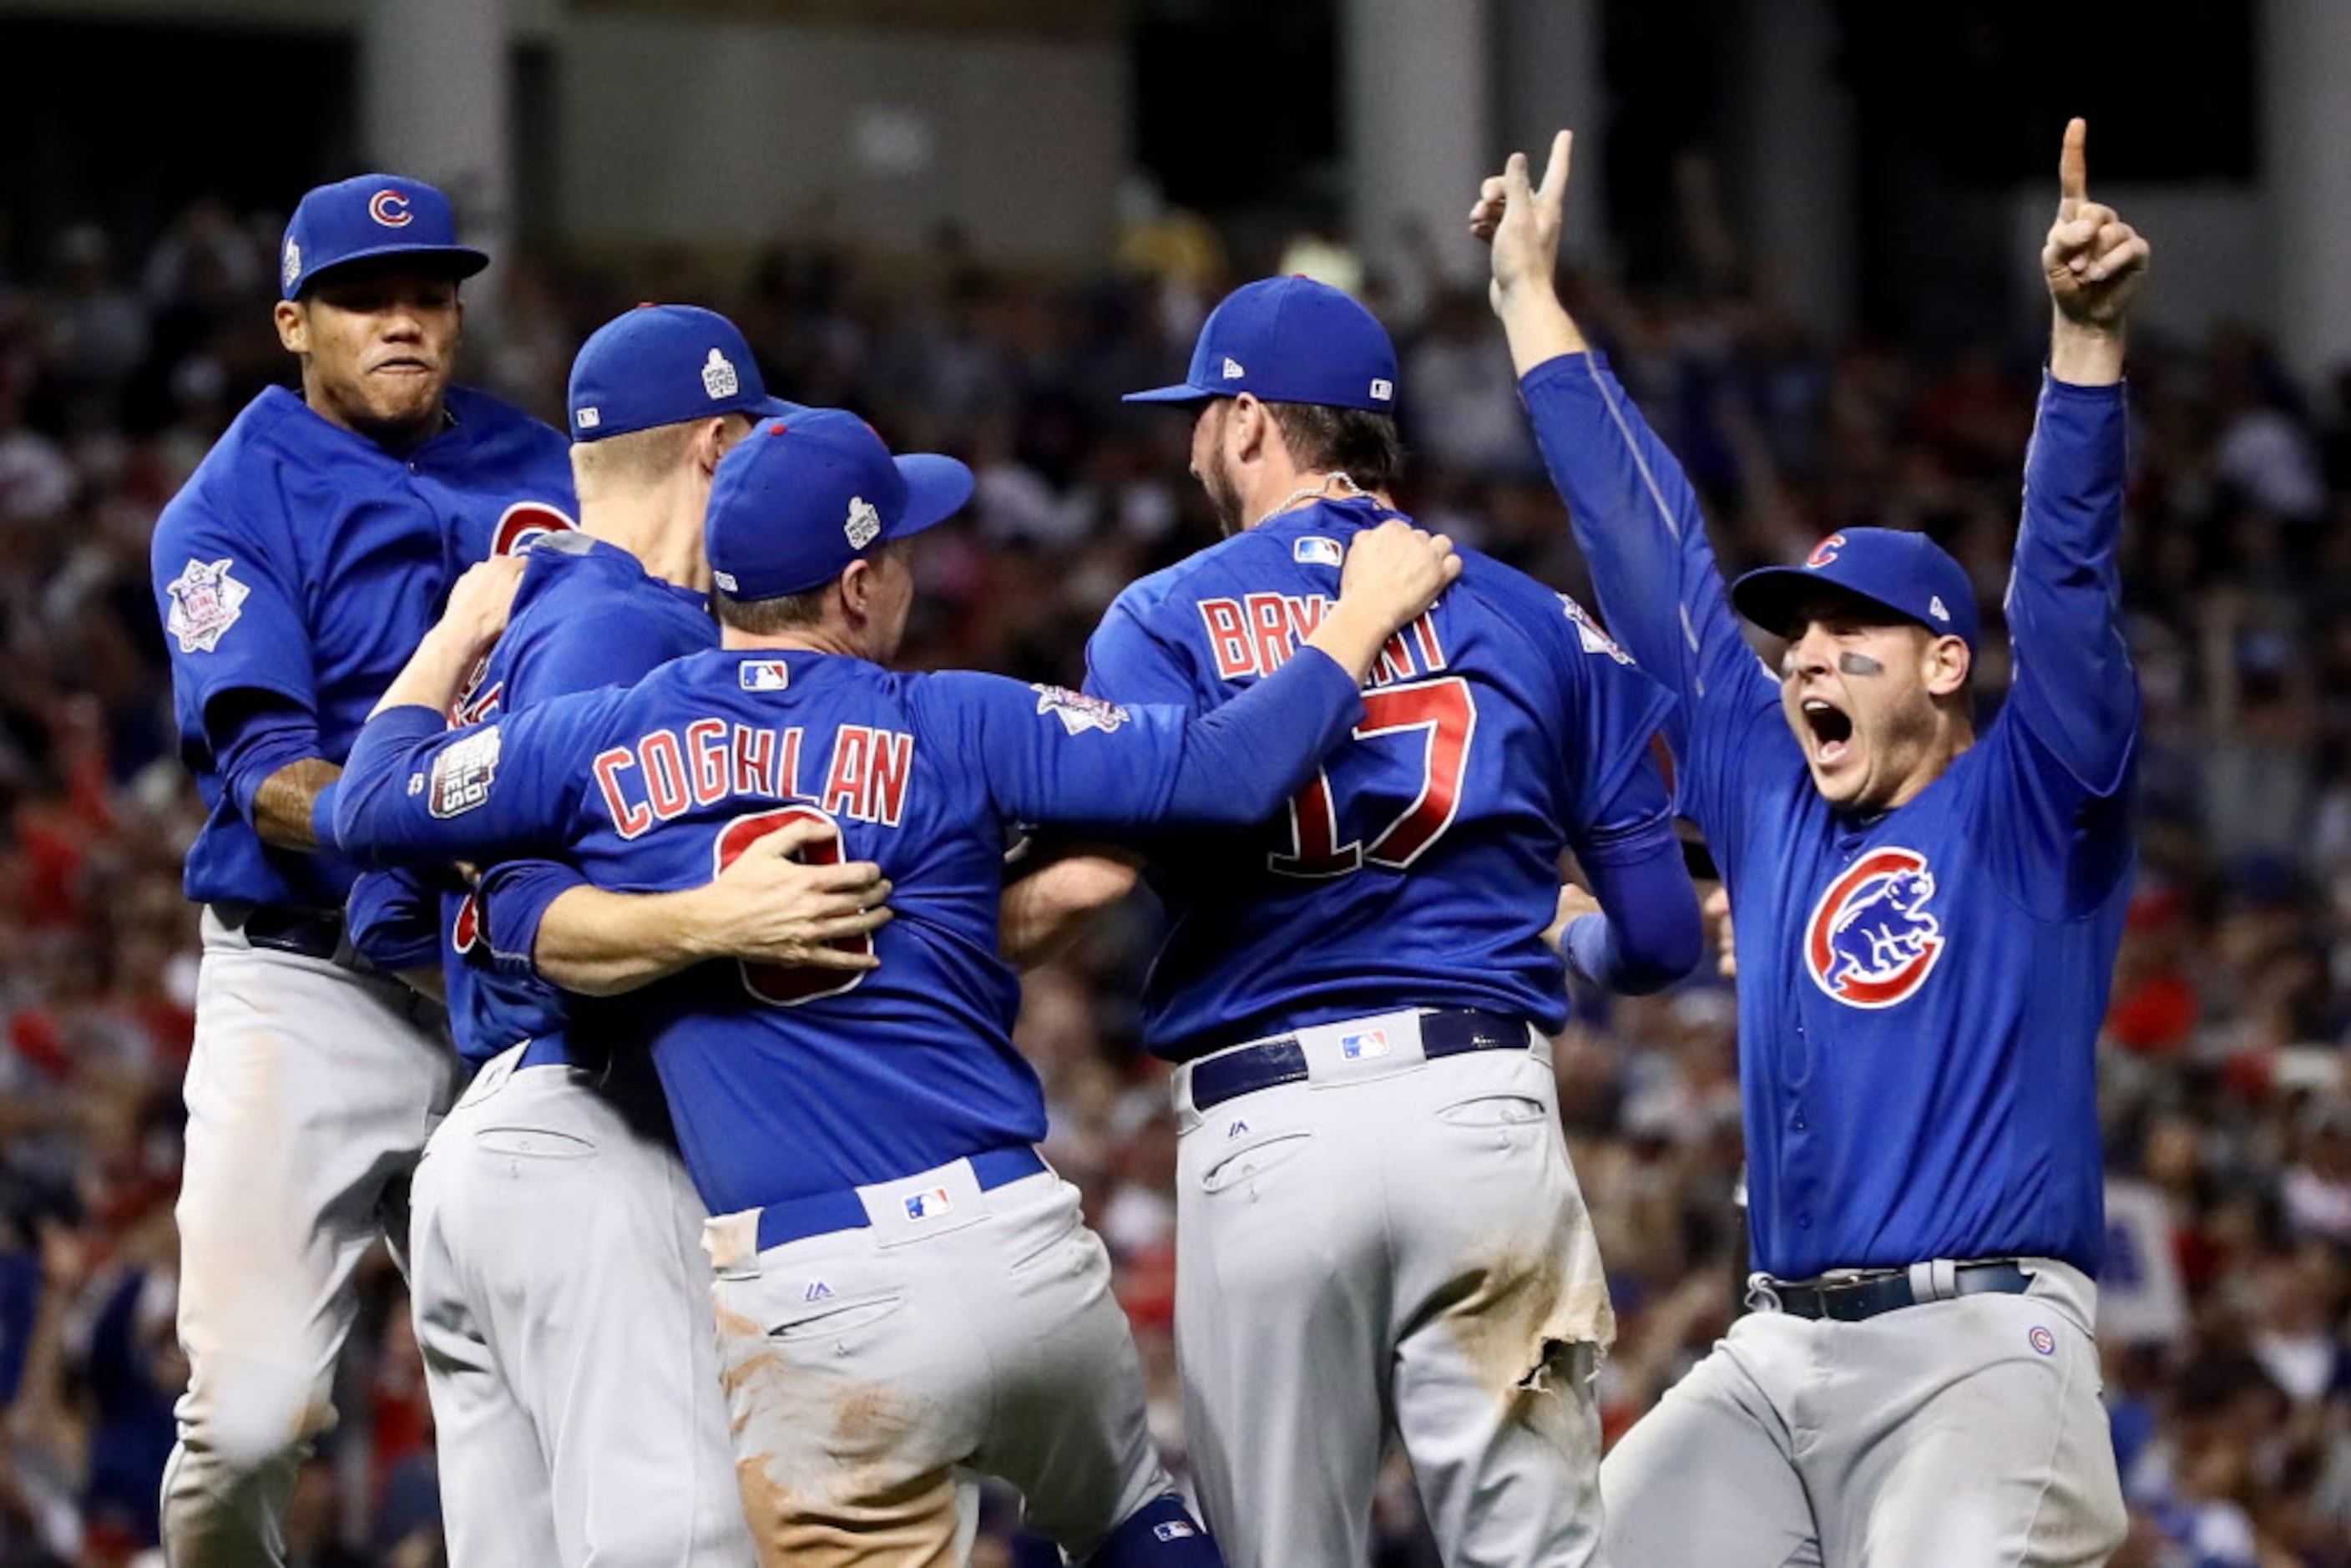 Cubs win first World Series in more than a century, Baseball